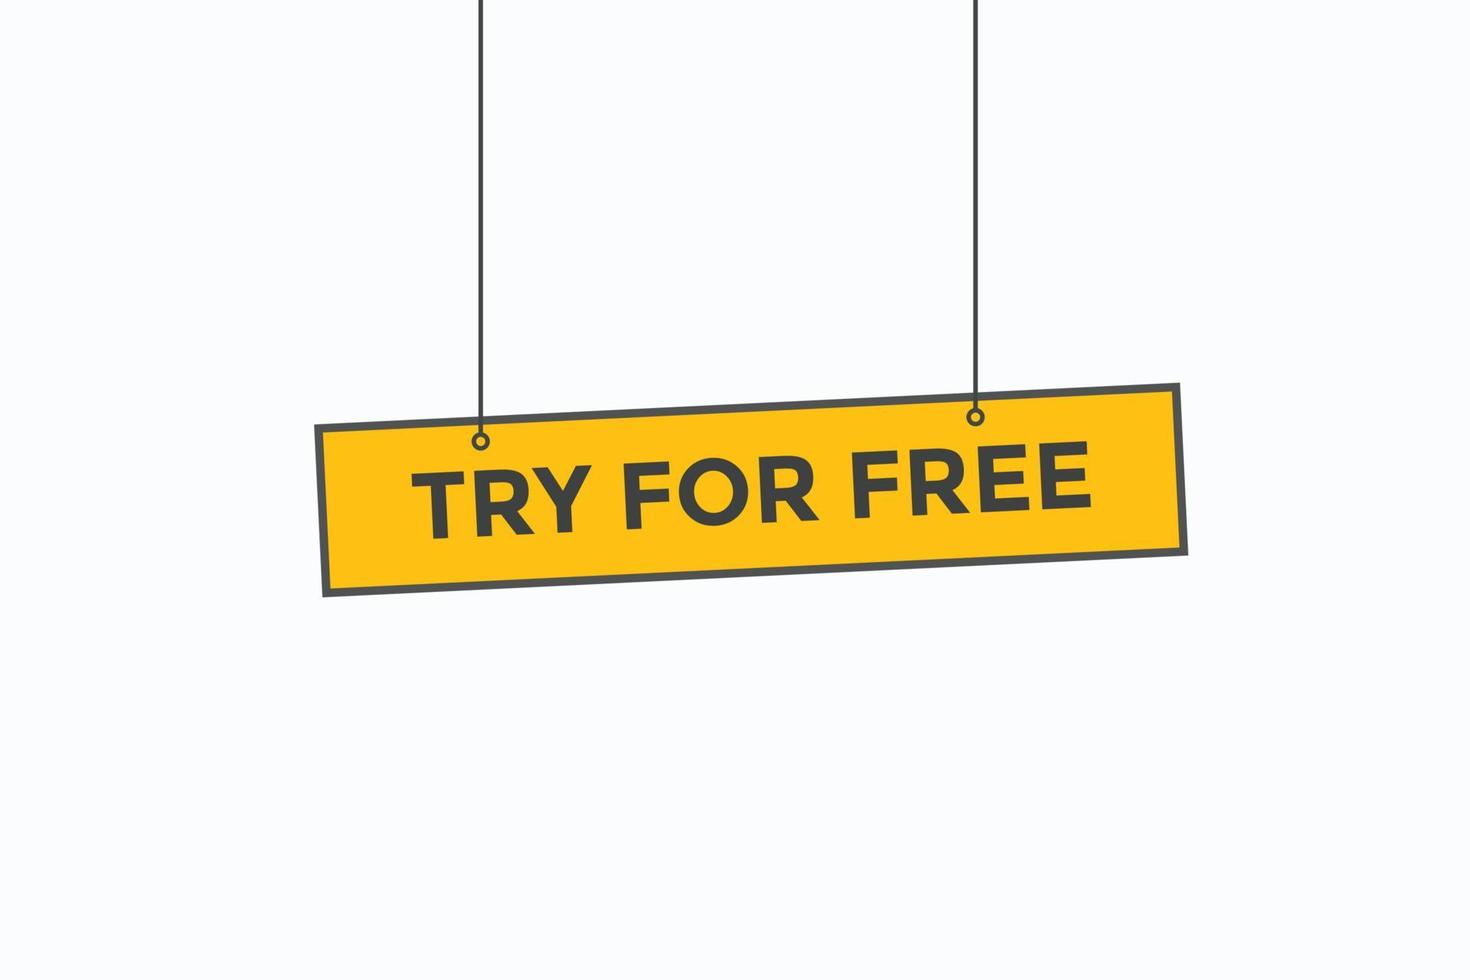 try for free button vectors.sign label speech bubble try for free vector